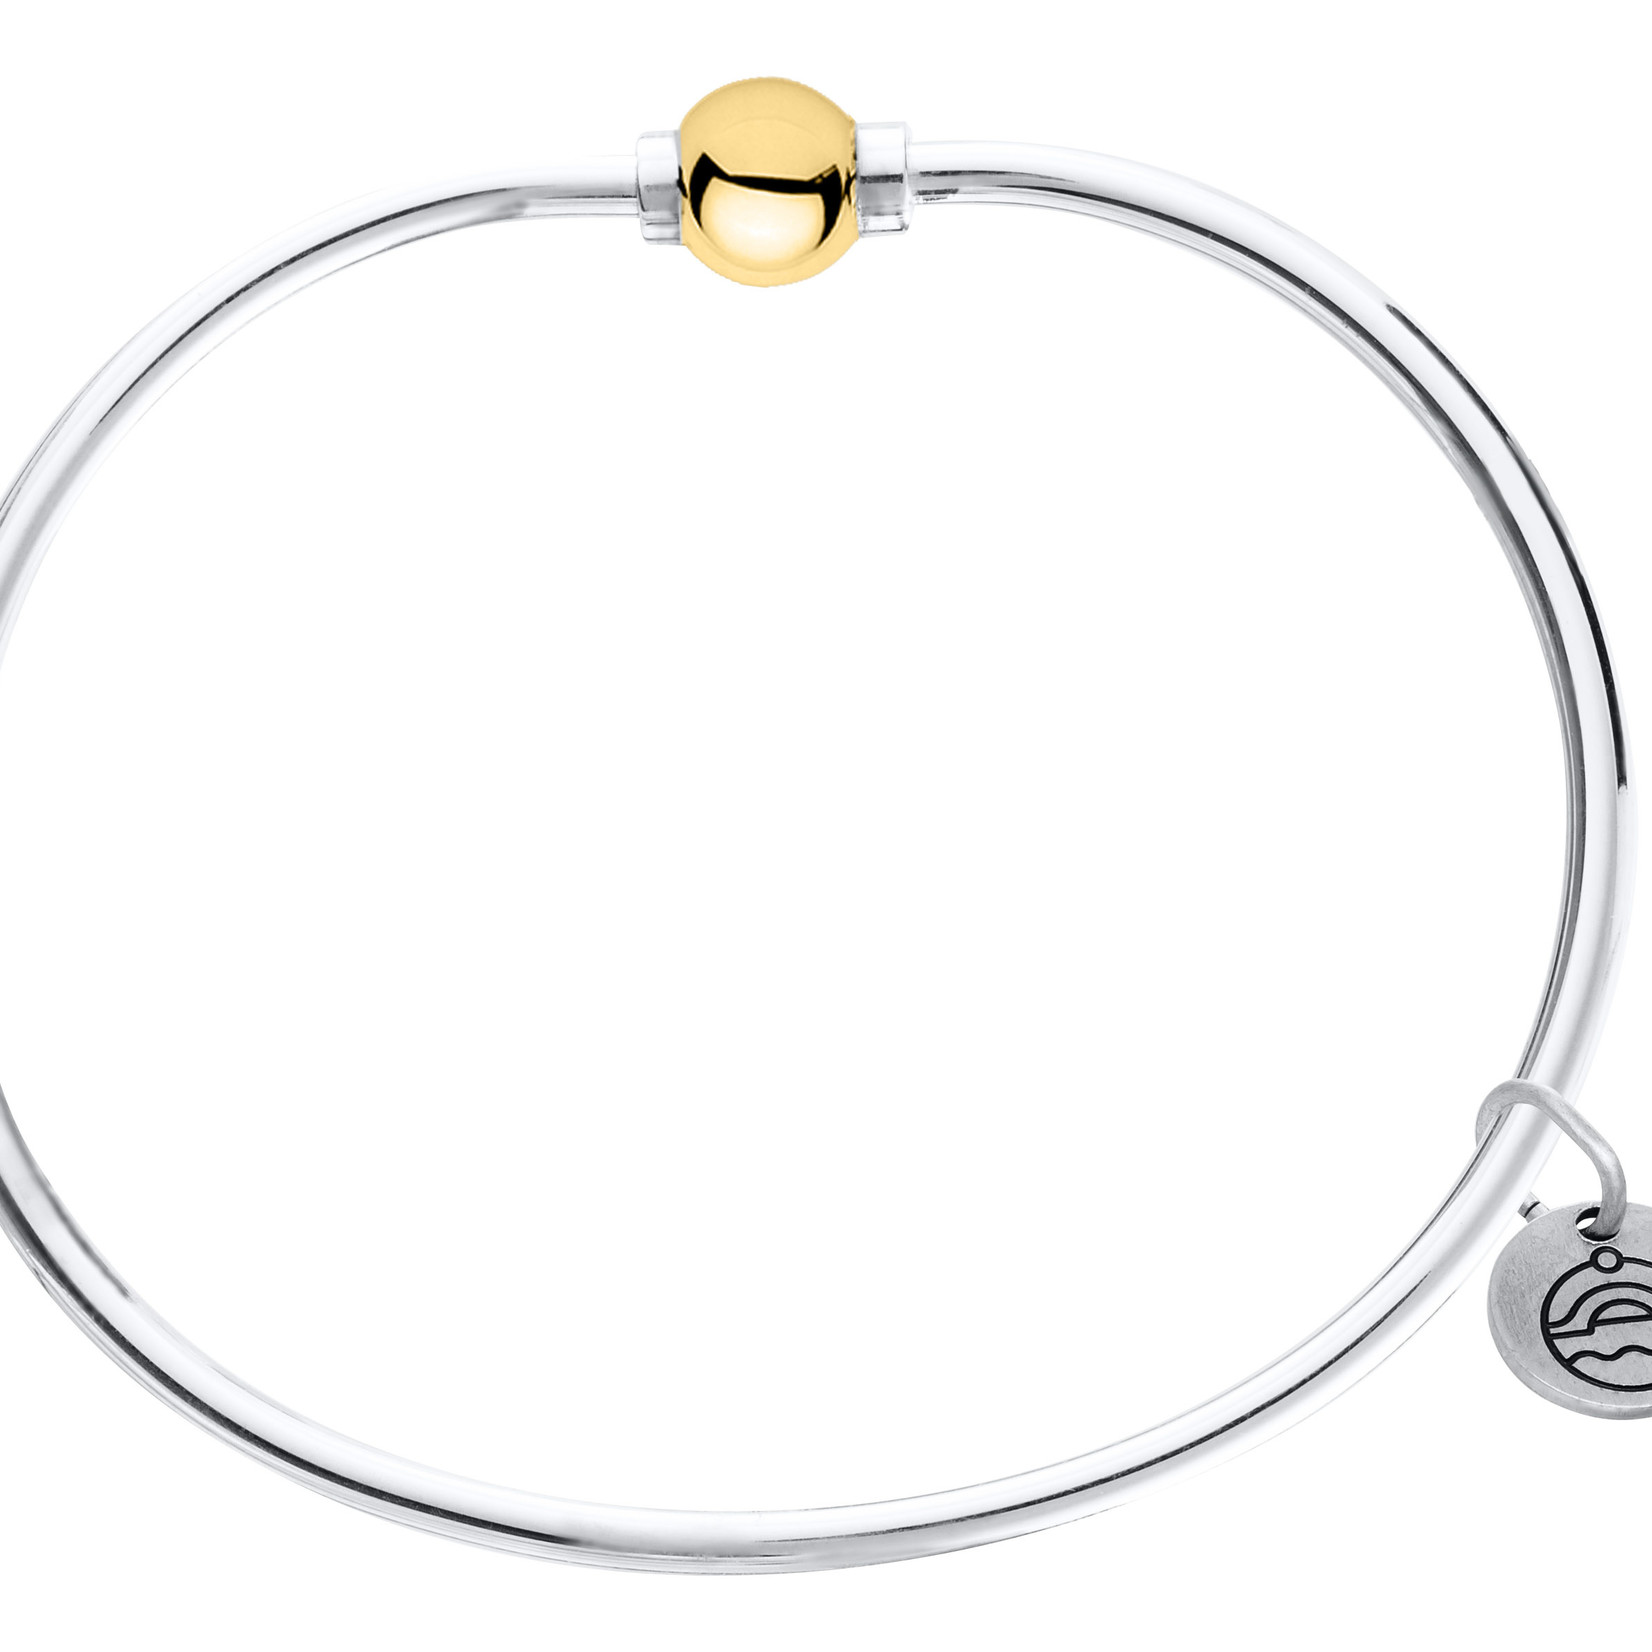 LeStage - 6.5" The Classic Cape Cod Bracelet - Sterling Silver with a 14K Yellow Gold Ball 6.5"